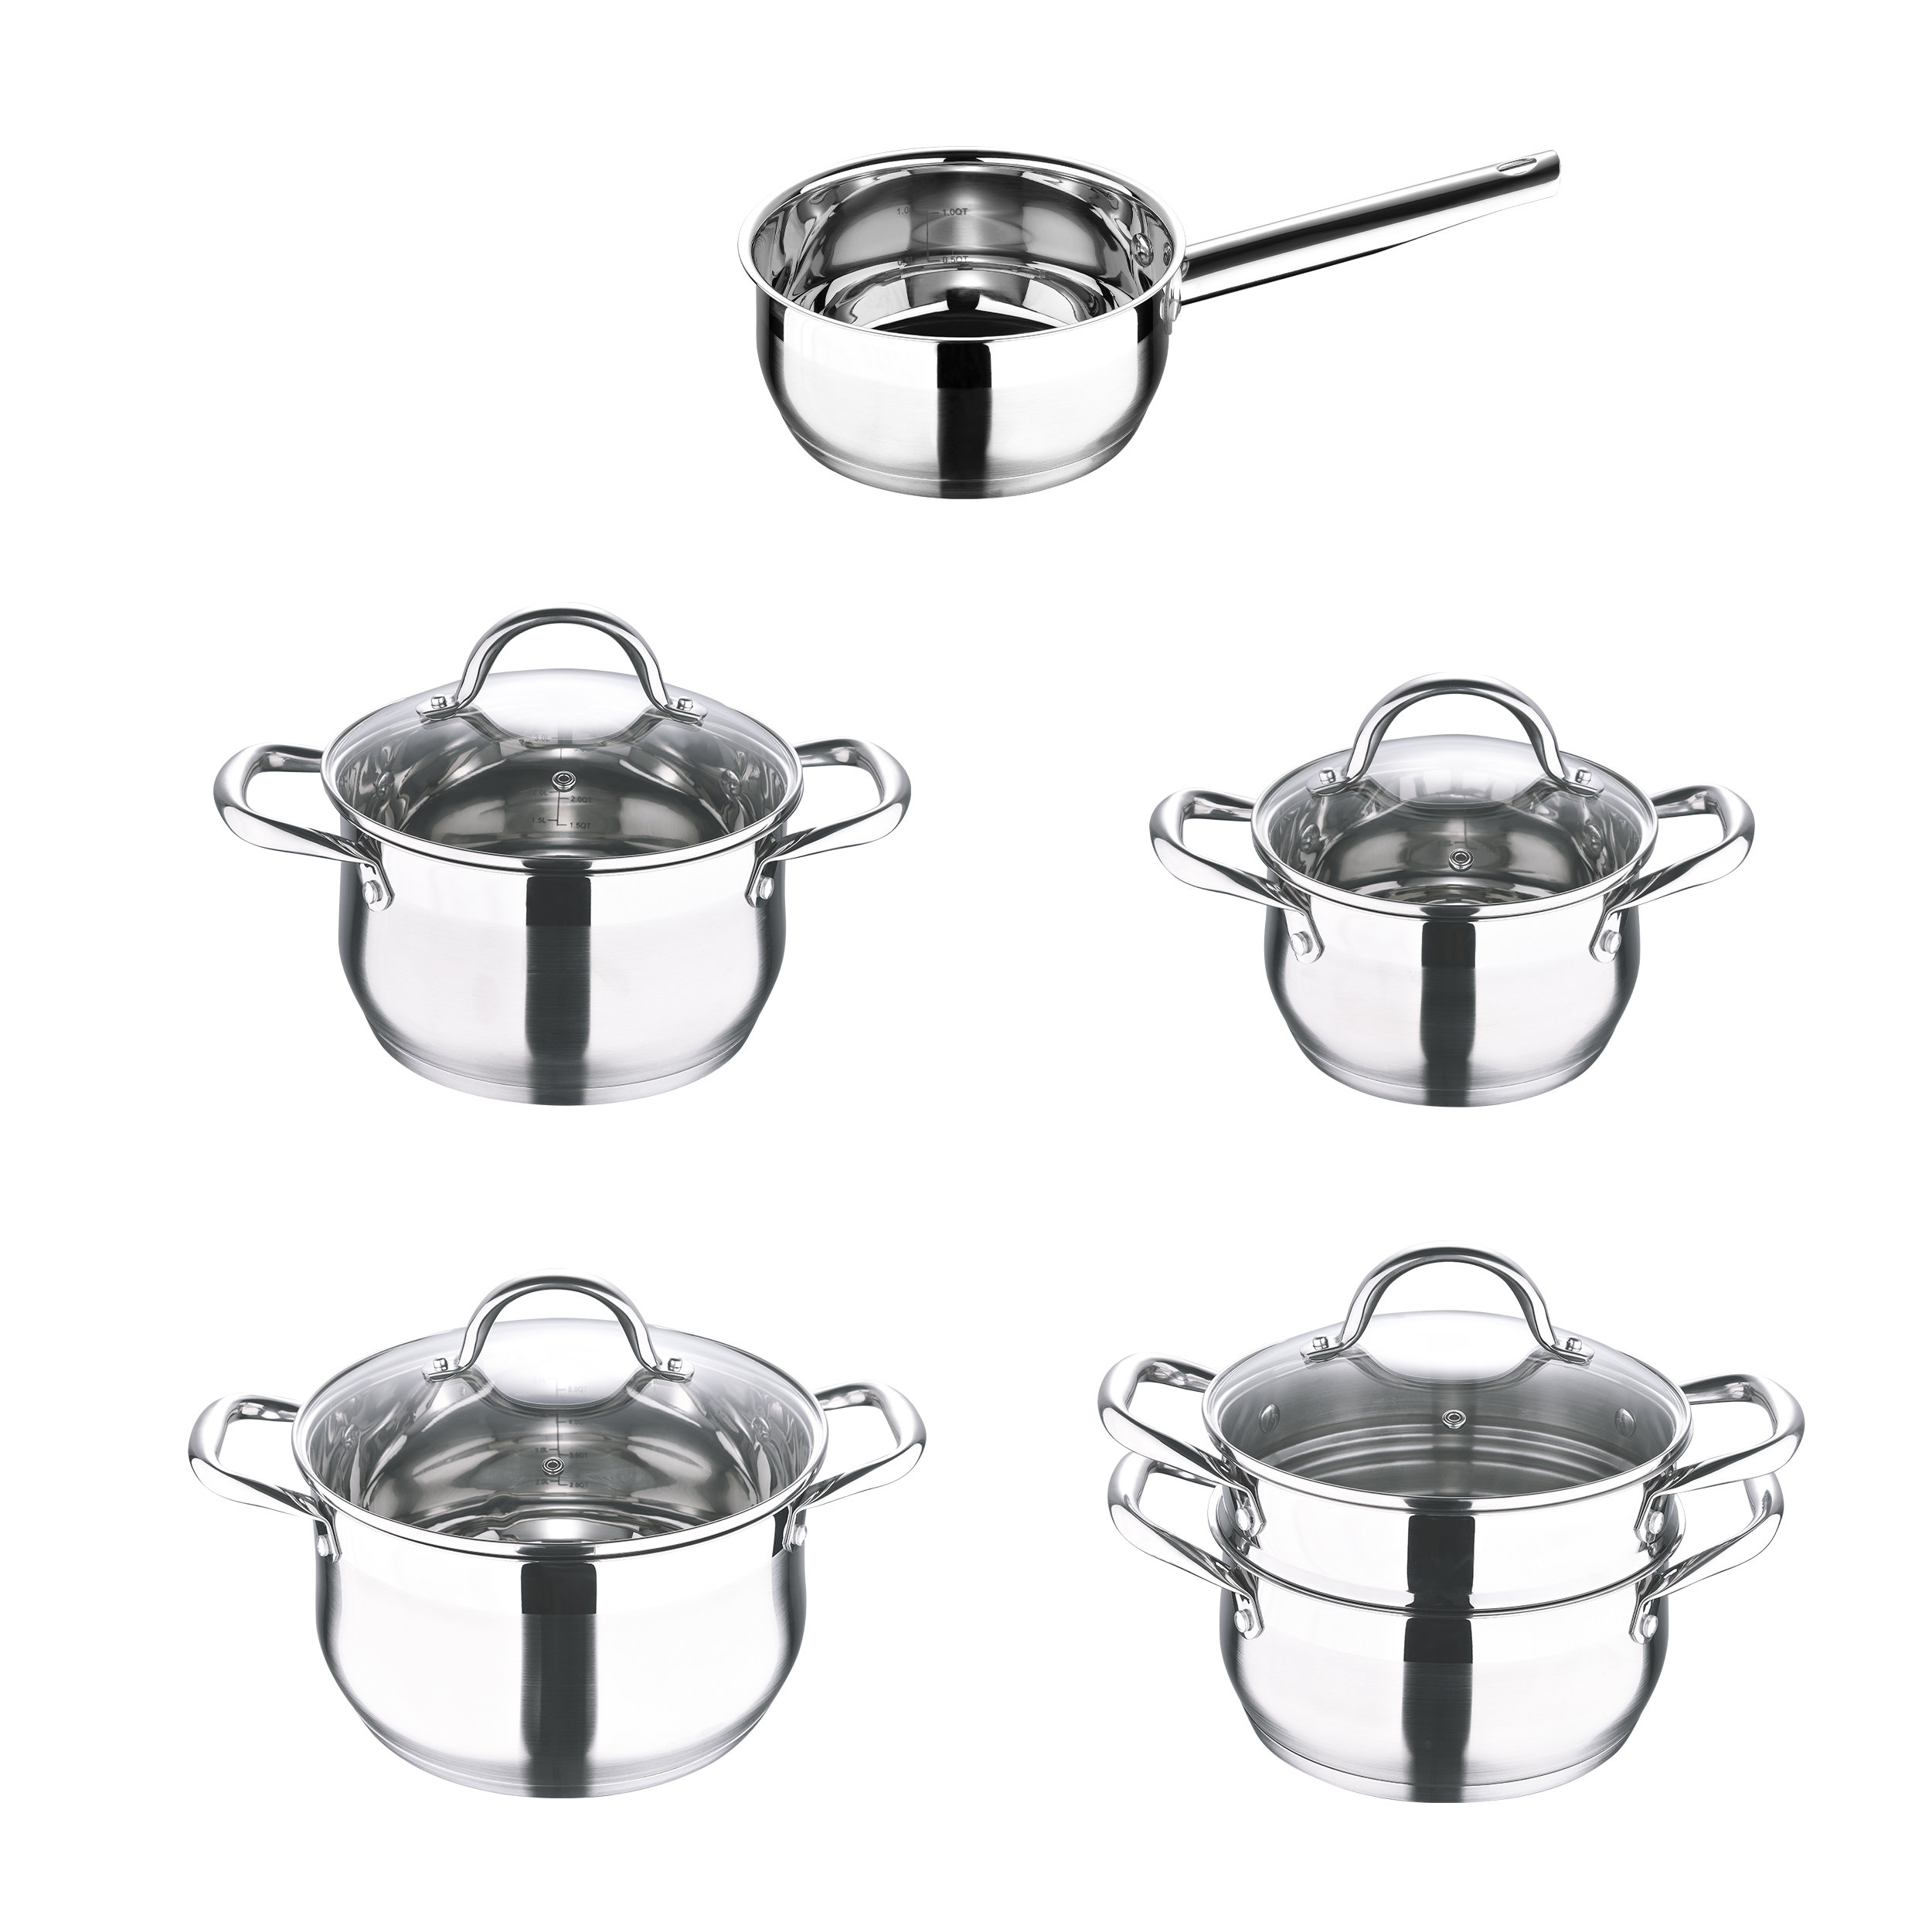 Bergner 12 qt. Stainless Steel Nonstick Stock Pot with Lid